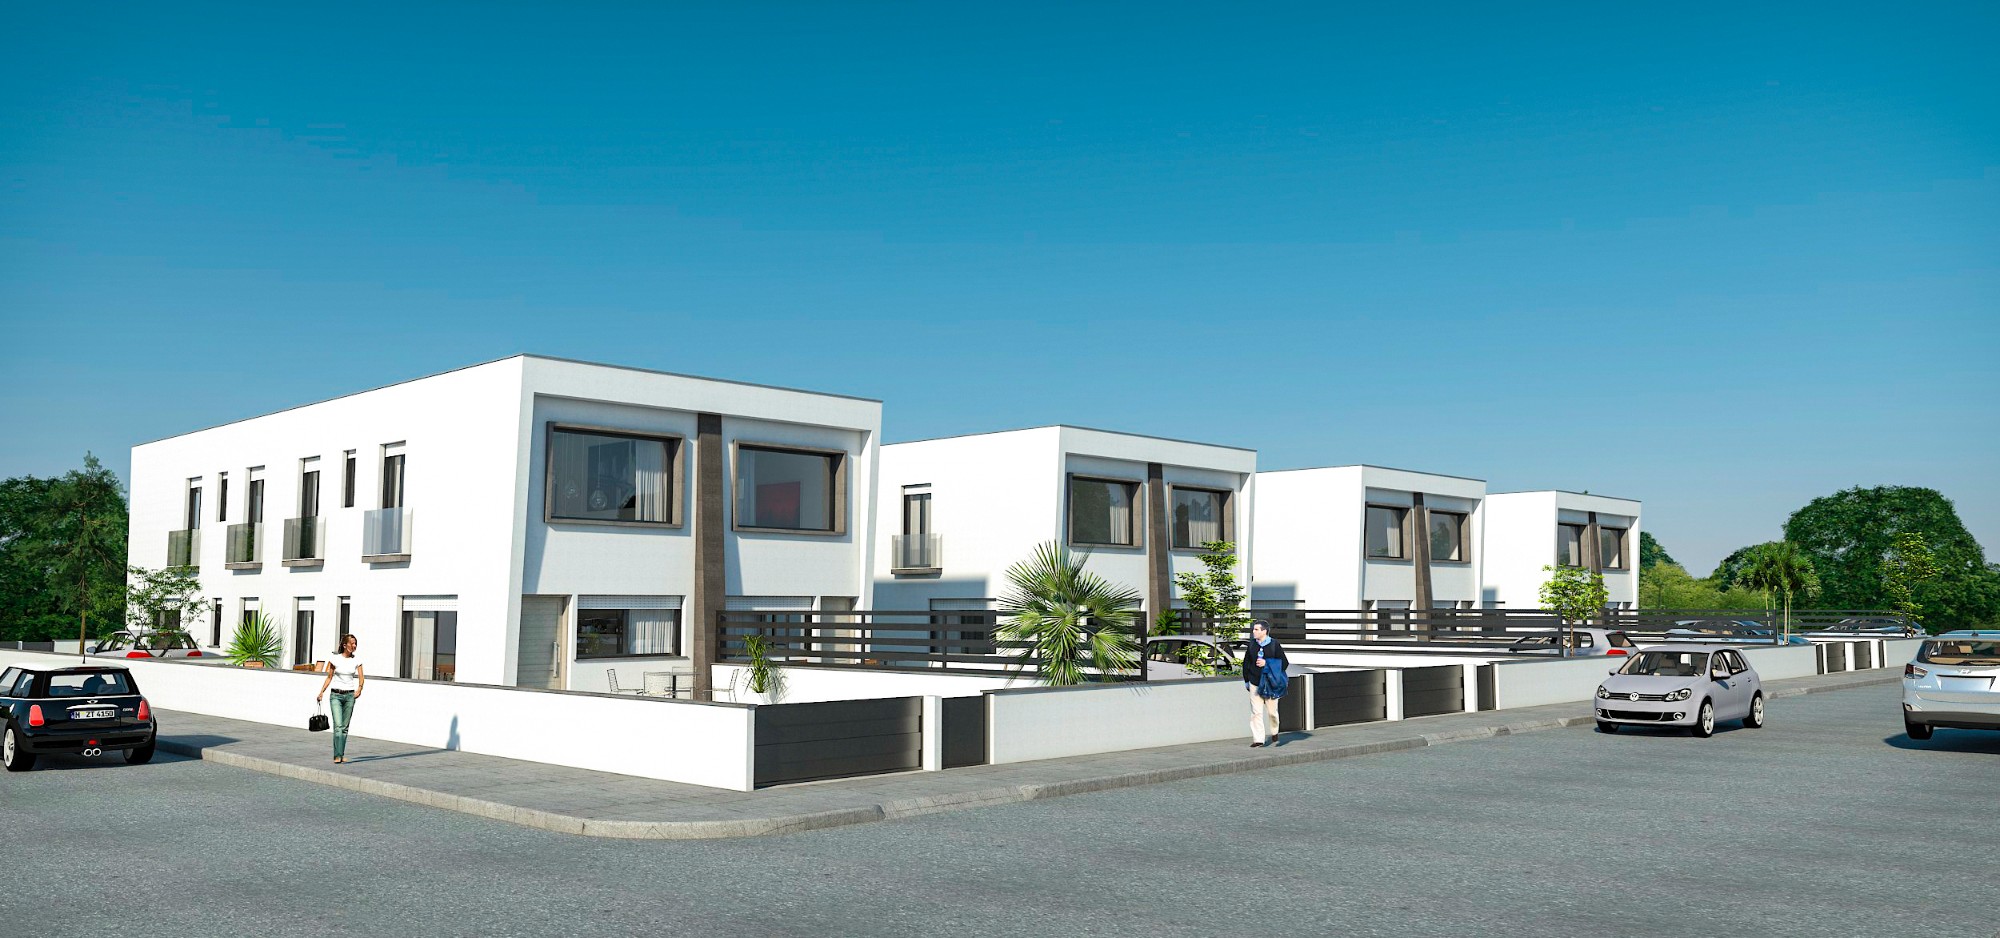 Property Image 619274-gran-alacant-townhouses-3-2